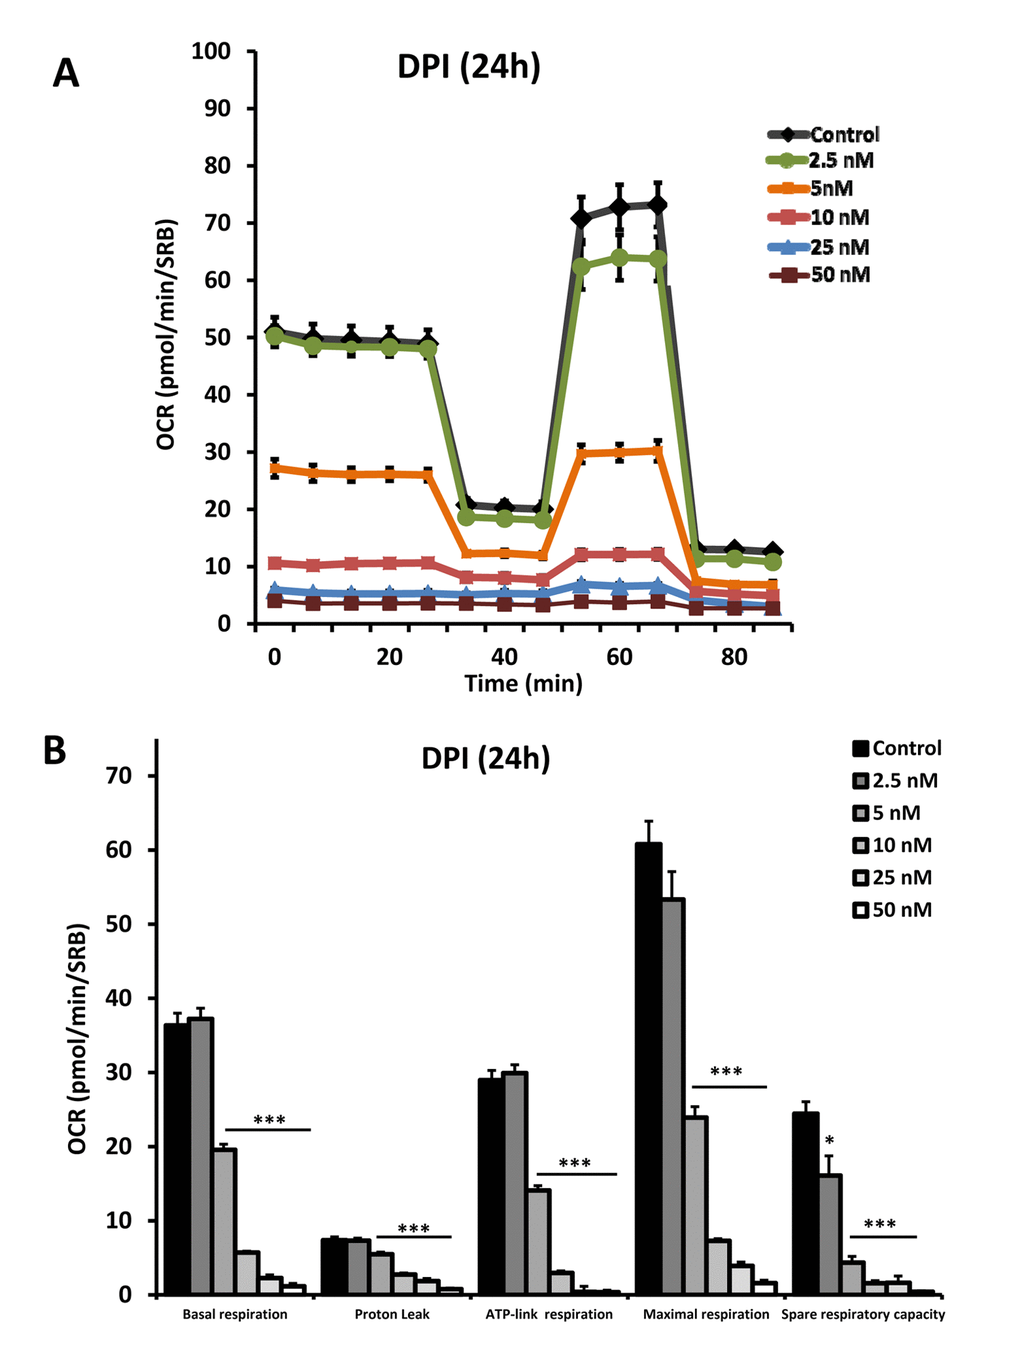 DPI potently inhibits mitochondrial respiration. After 24 hours of treatment with DPI (2.5 to 50 nM), MCF7 cells were subjected to metabolic flux analysis with the Seahorse XFe96, which measures the OCR (the oxygen consumption rate). Note that at concentration of 2.5 nM, little or no effect was observed. However, at 5 nM, basal respiration was reduced by ~ 50%. *** p